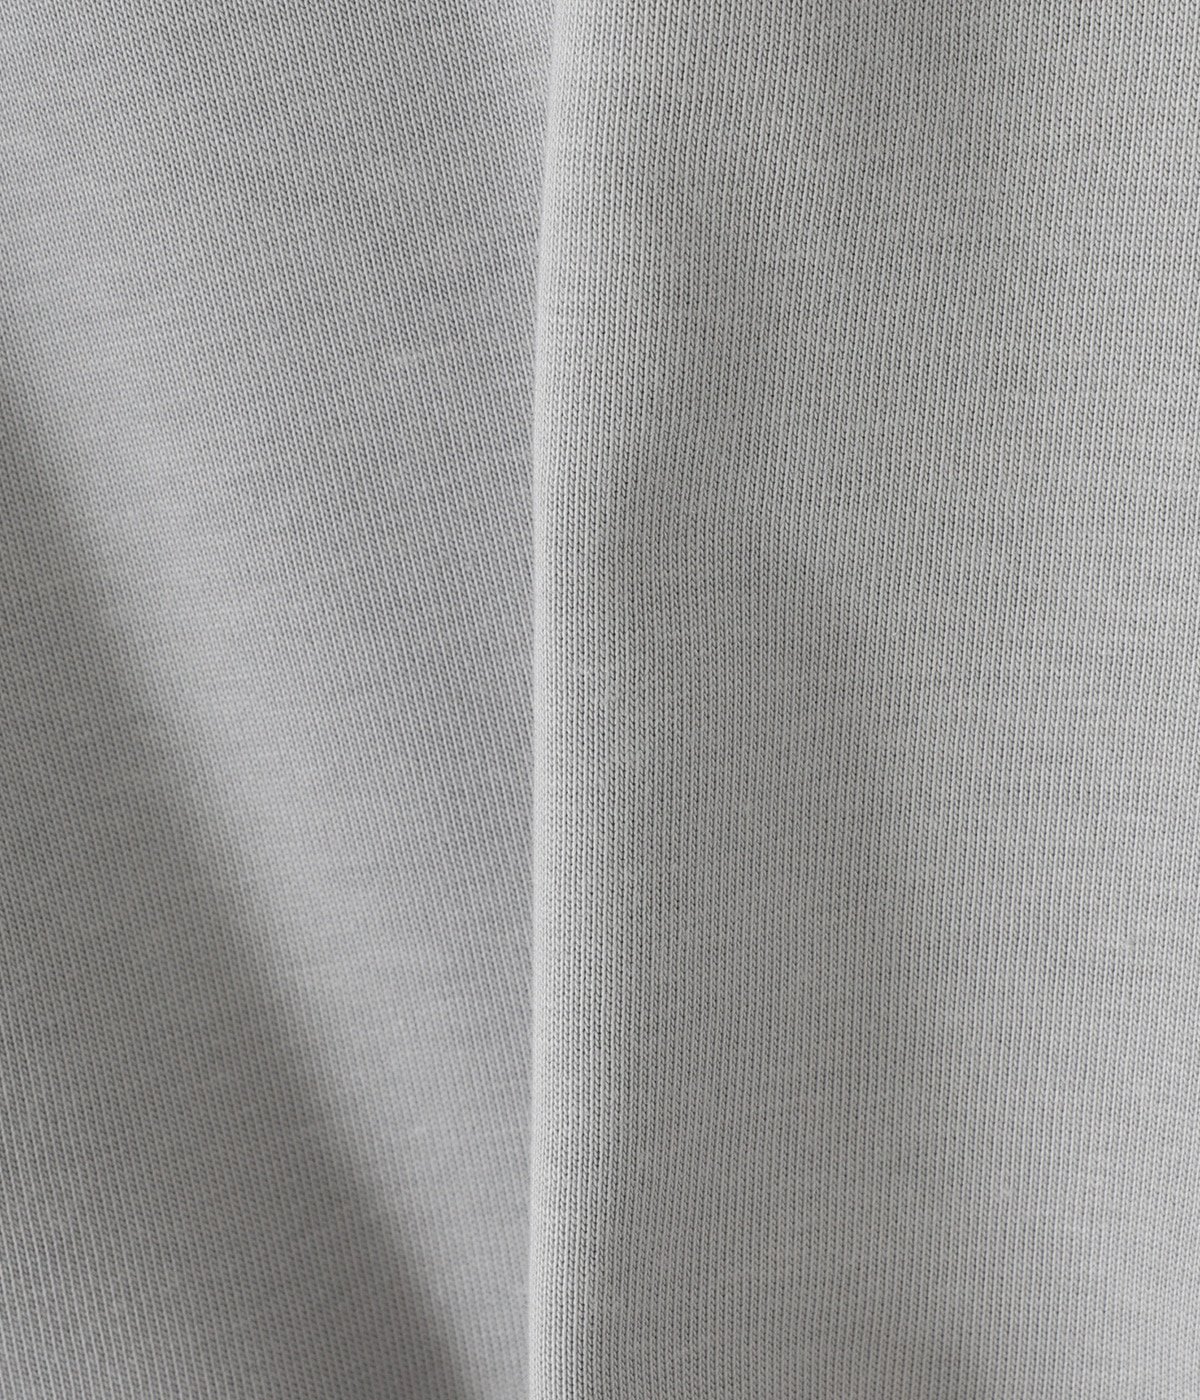 OVERSIZE CREW NECK - 20//1 recycle suvin organic cotton knit